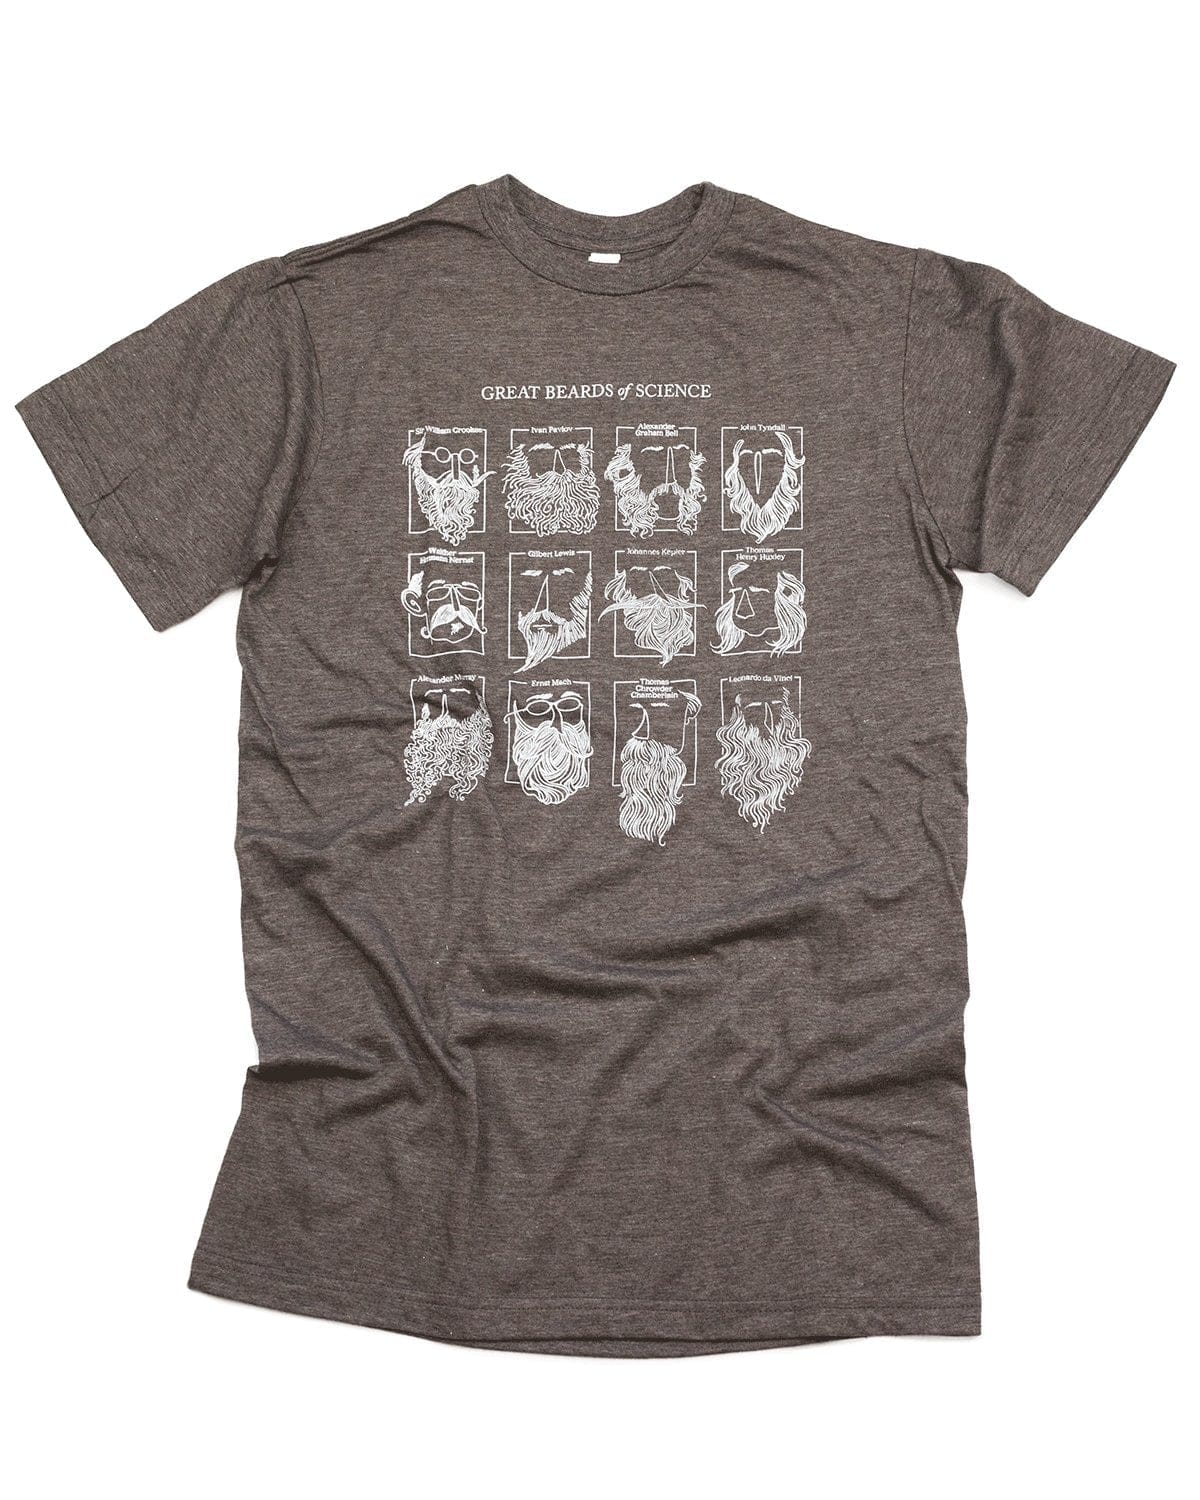 Great Beards of Science Graphic Tee (Brown) Cognitive Surplus